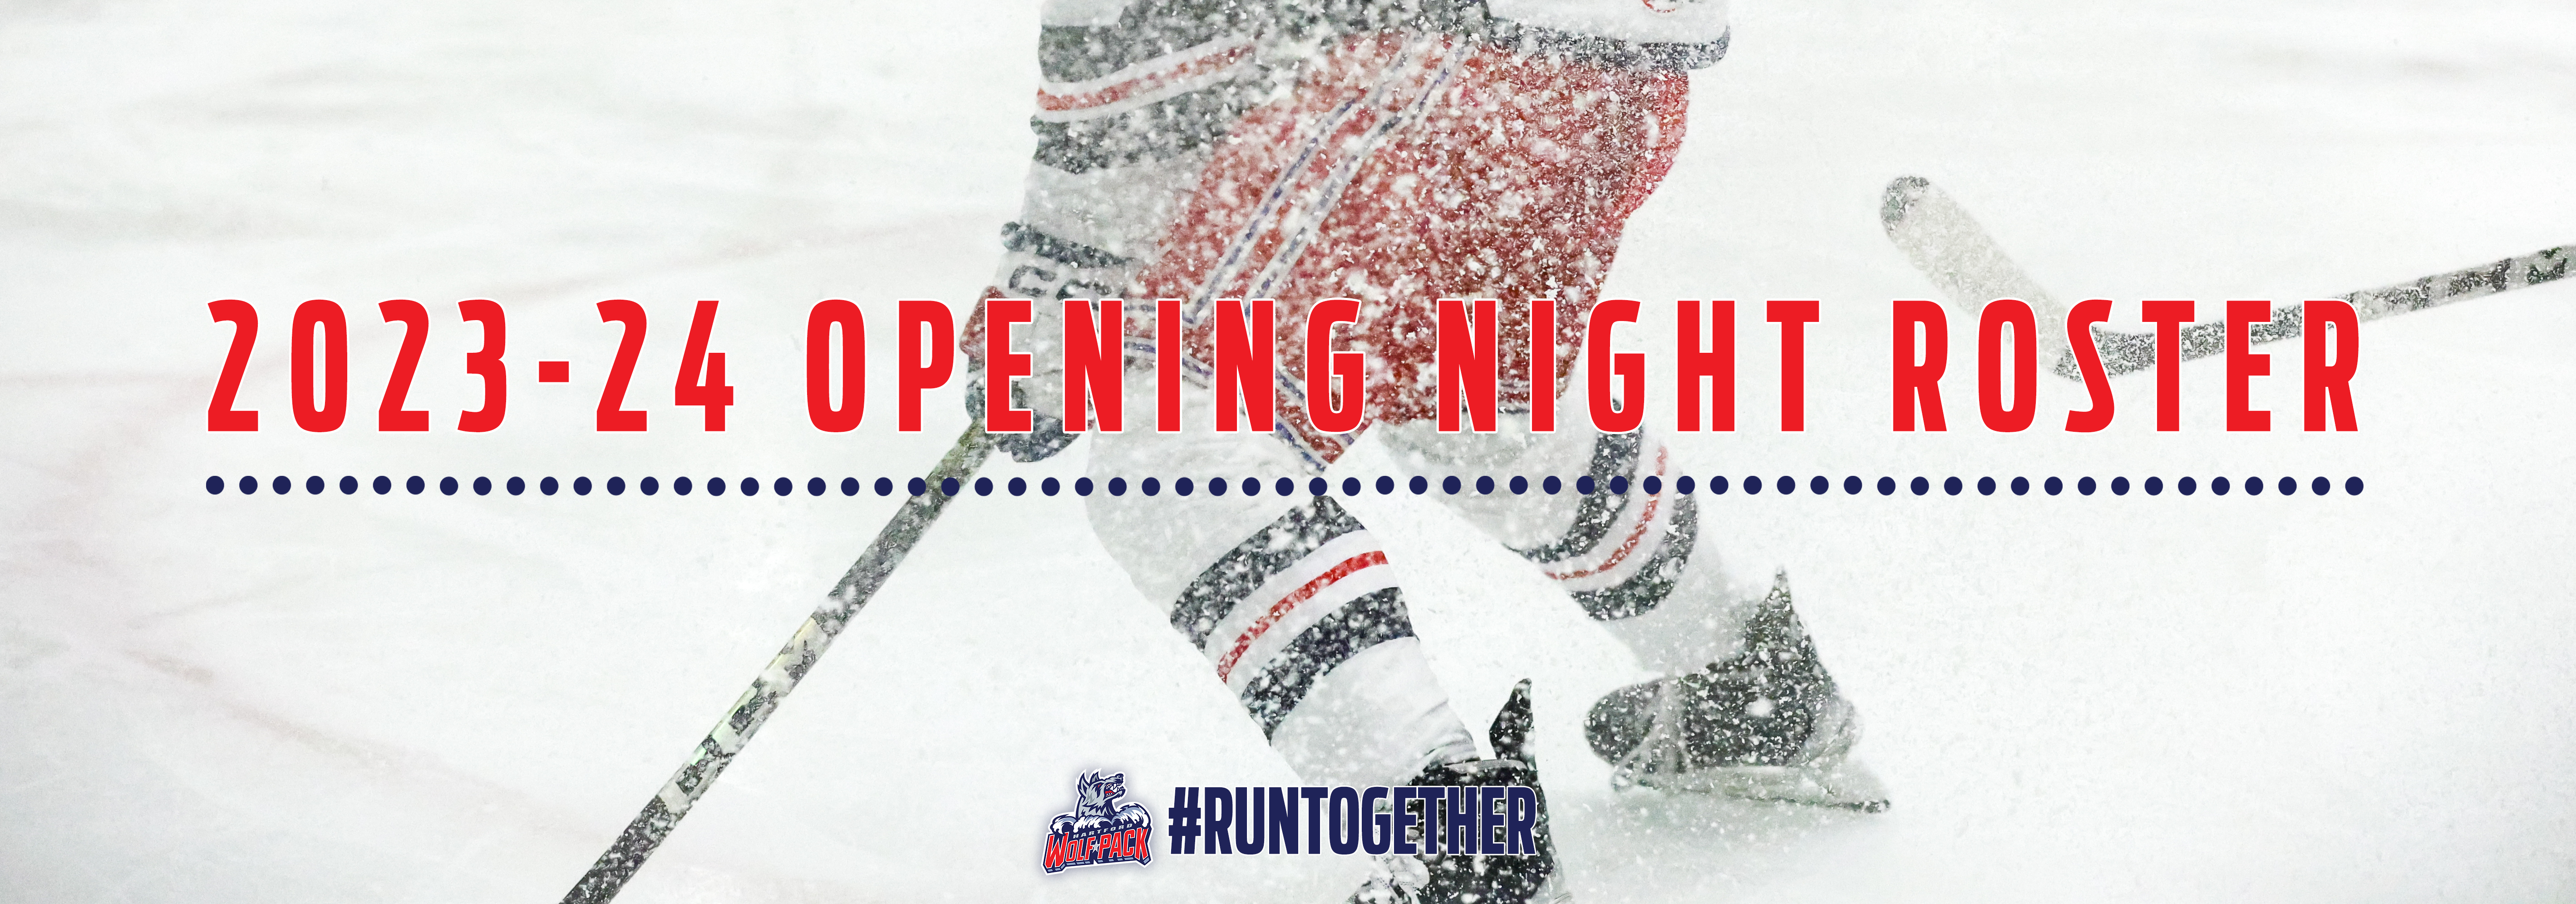 HARTFORD WOLF PACK ANNOUNCE OPENING NIGHT ROSTER